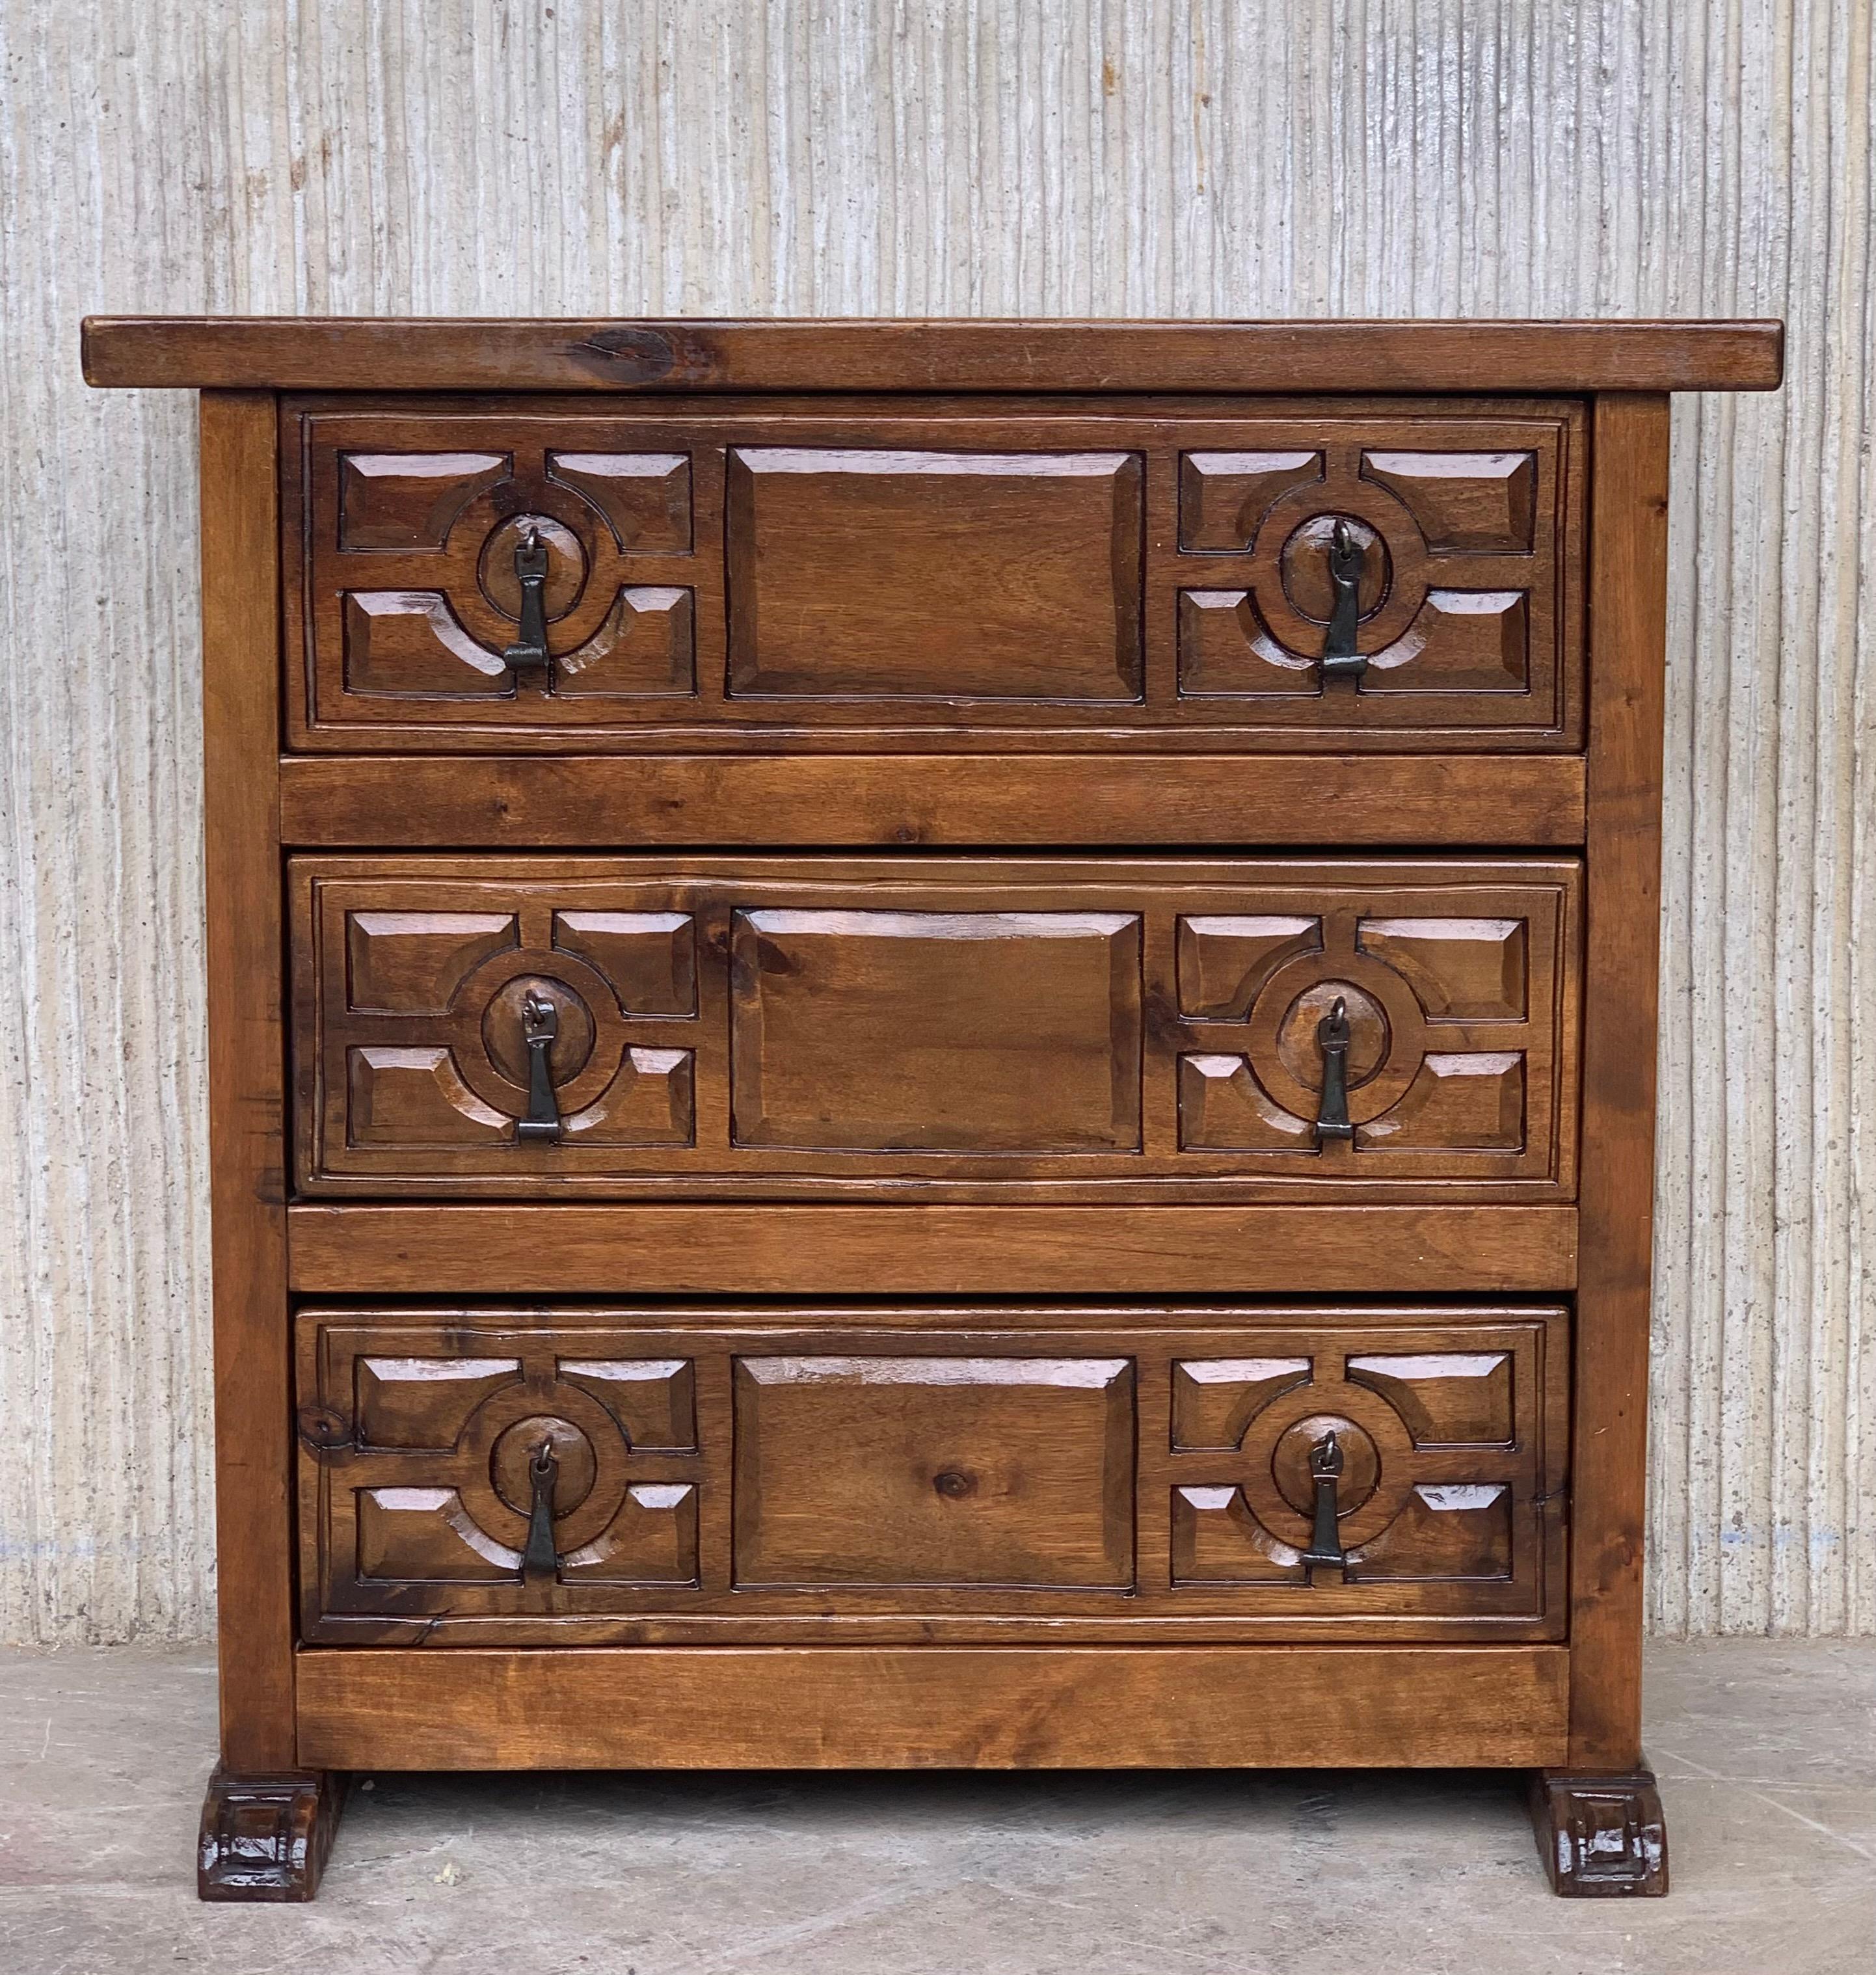 19th century Spanish carved walnut chest of drawers or console with three drawers and original iron hardware.
You can use like a commode, chest of drawers or nightstand.
This elegant antique walnut console was crafted in Spain, circa 1900. The